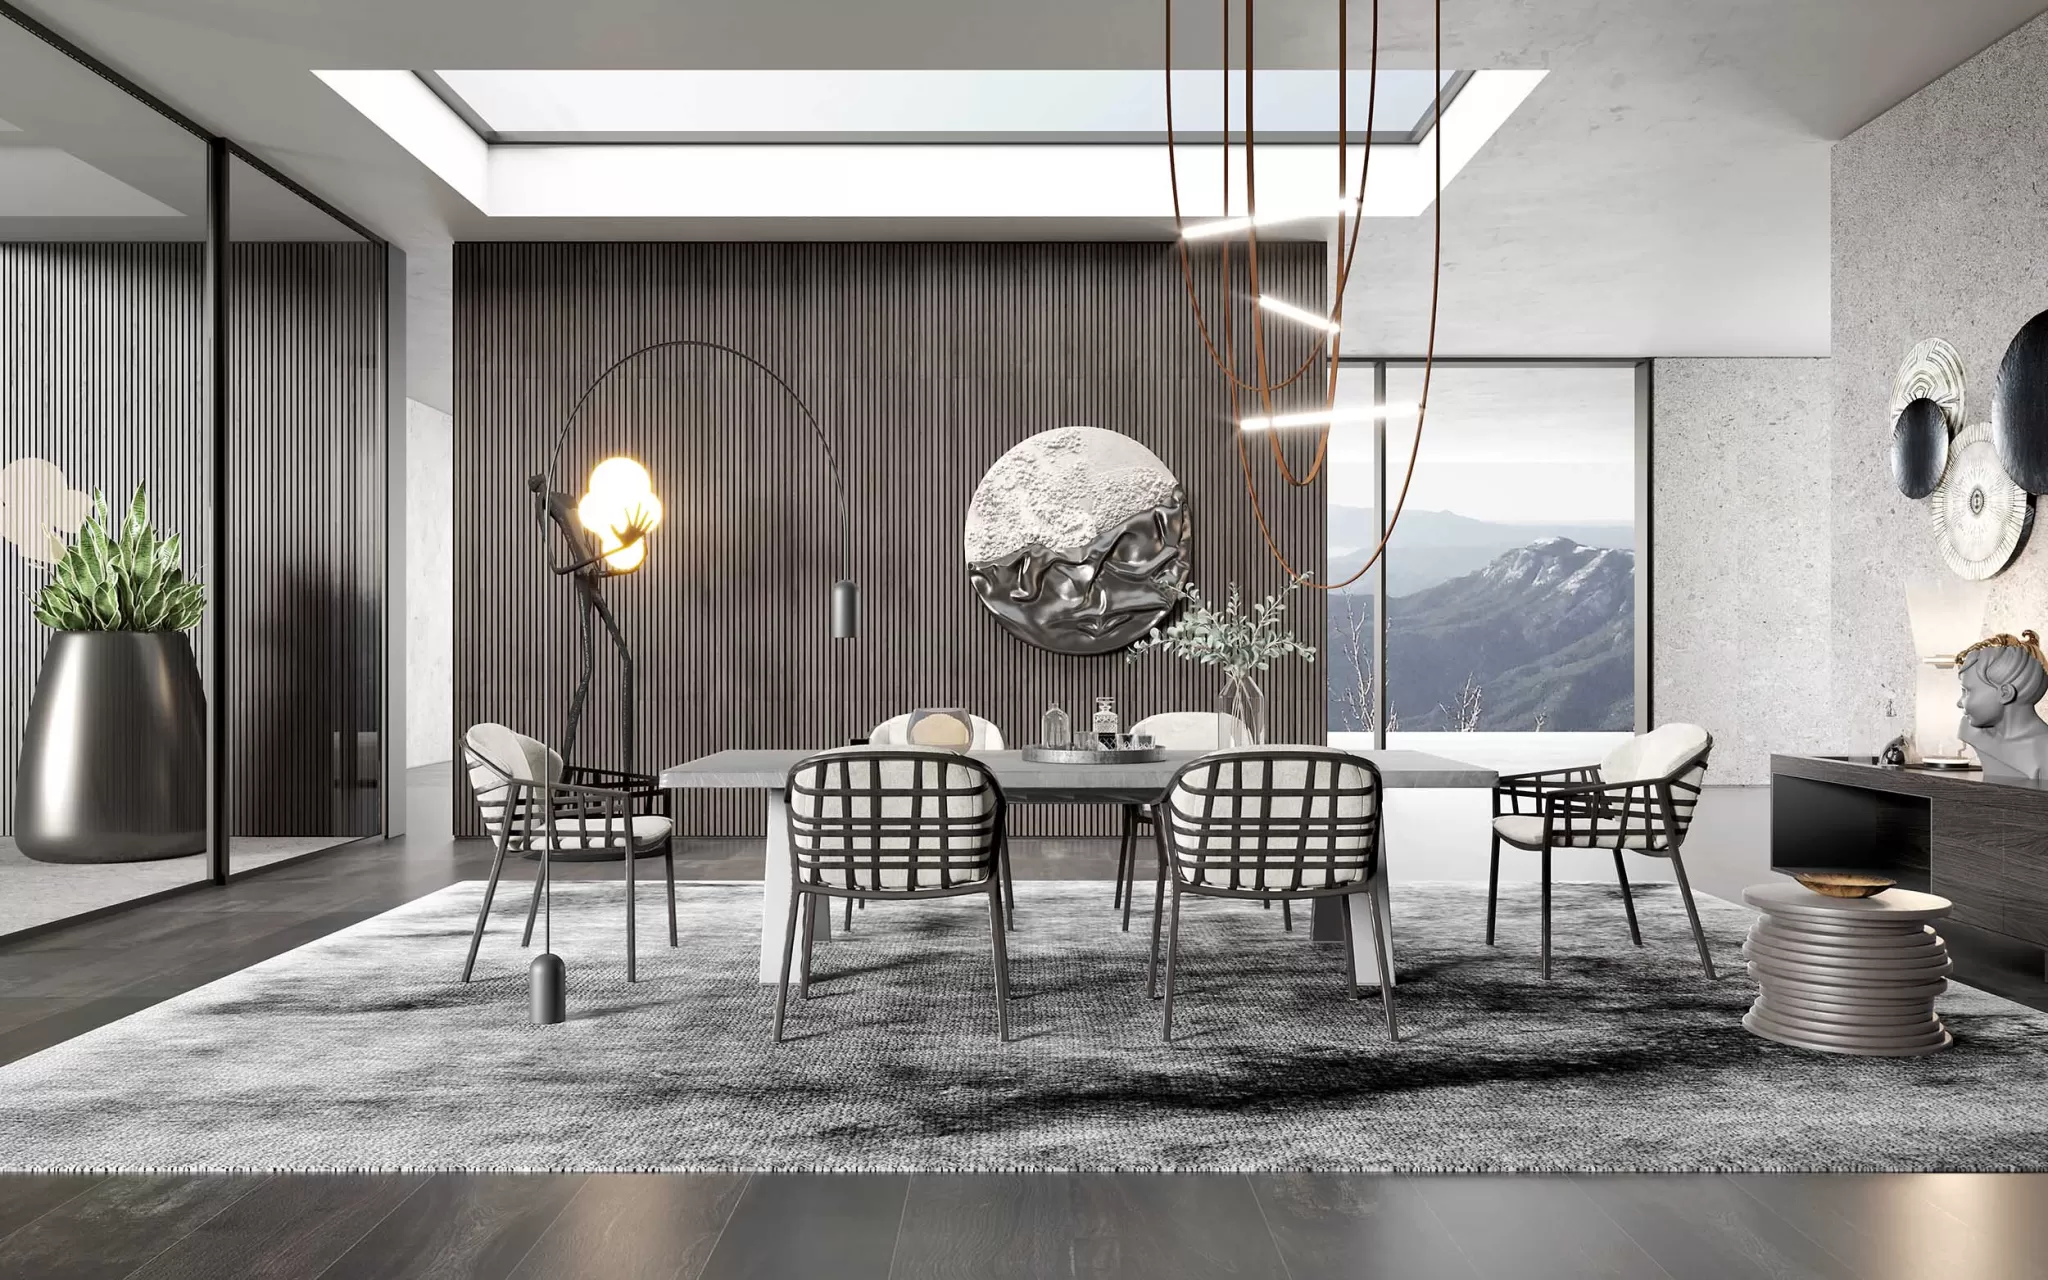 HOUSE SPACE 3D SCENES – DINING ROOM – 0062